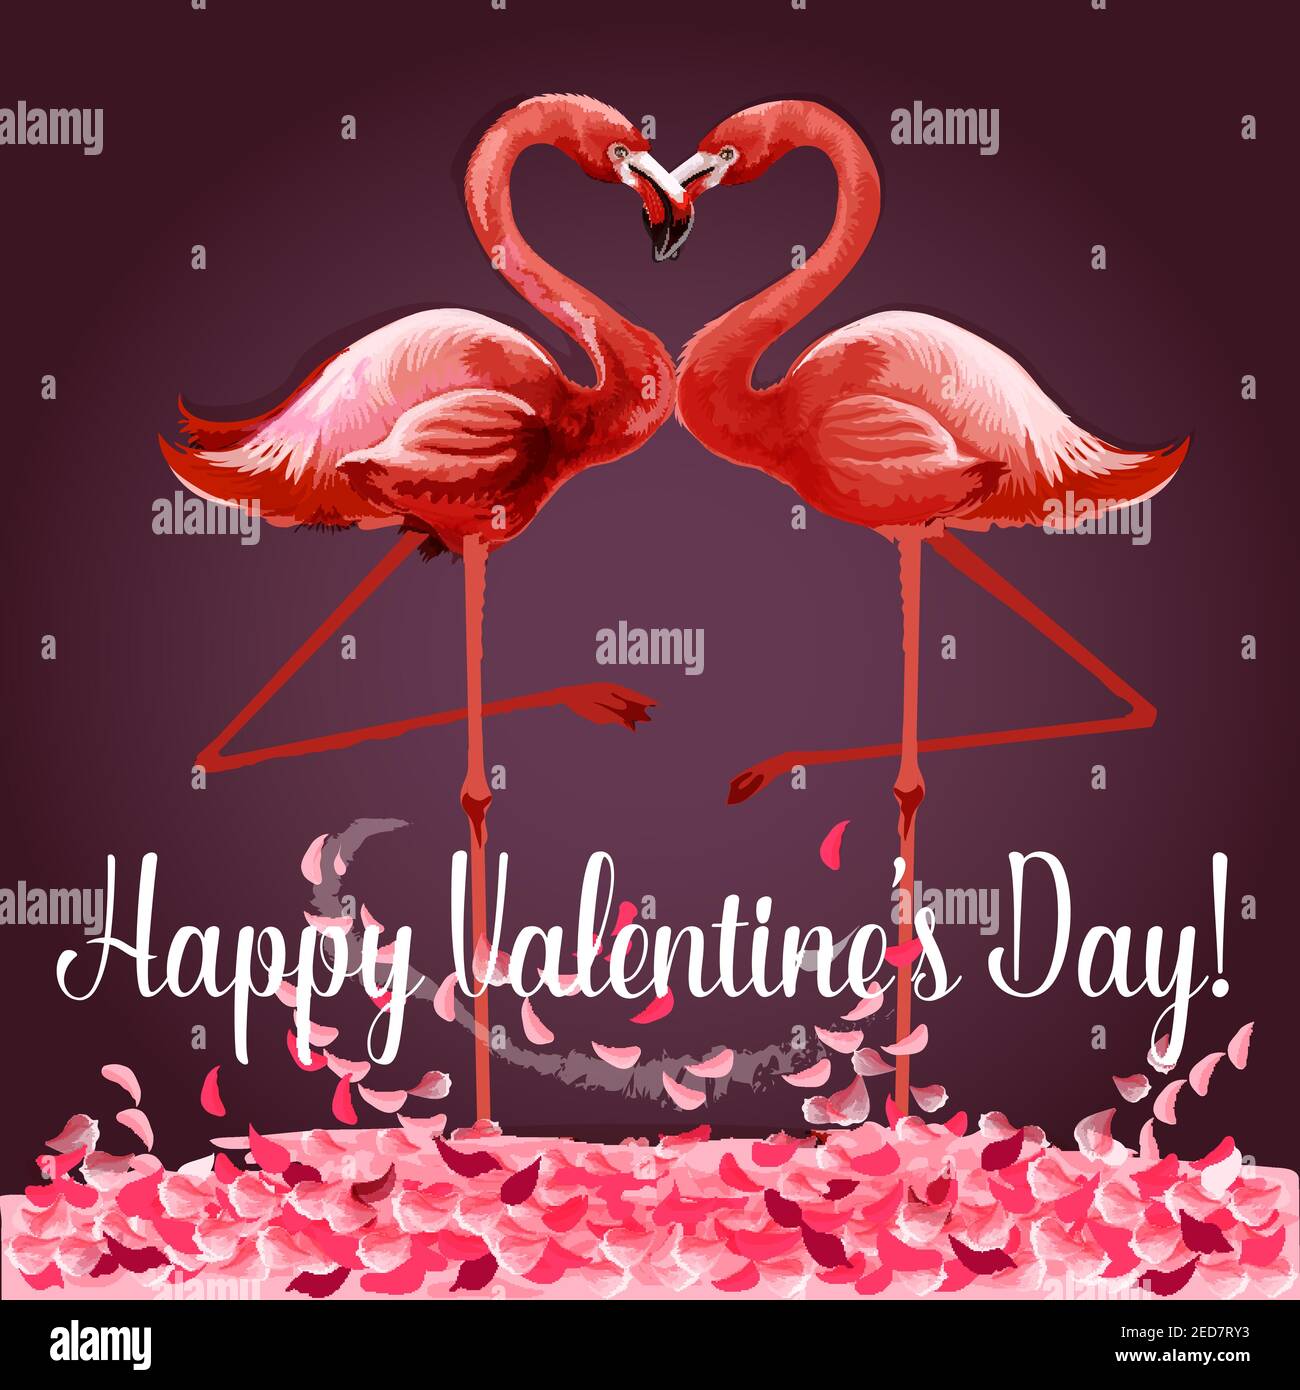 Love and Valentine Day card. Romantic pink flamingo birds join heads to create a heart. Greeting card with love birds and rose flower petals. Festive Stock Vector